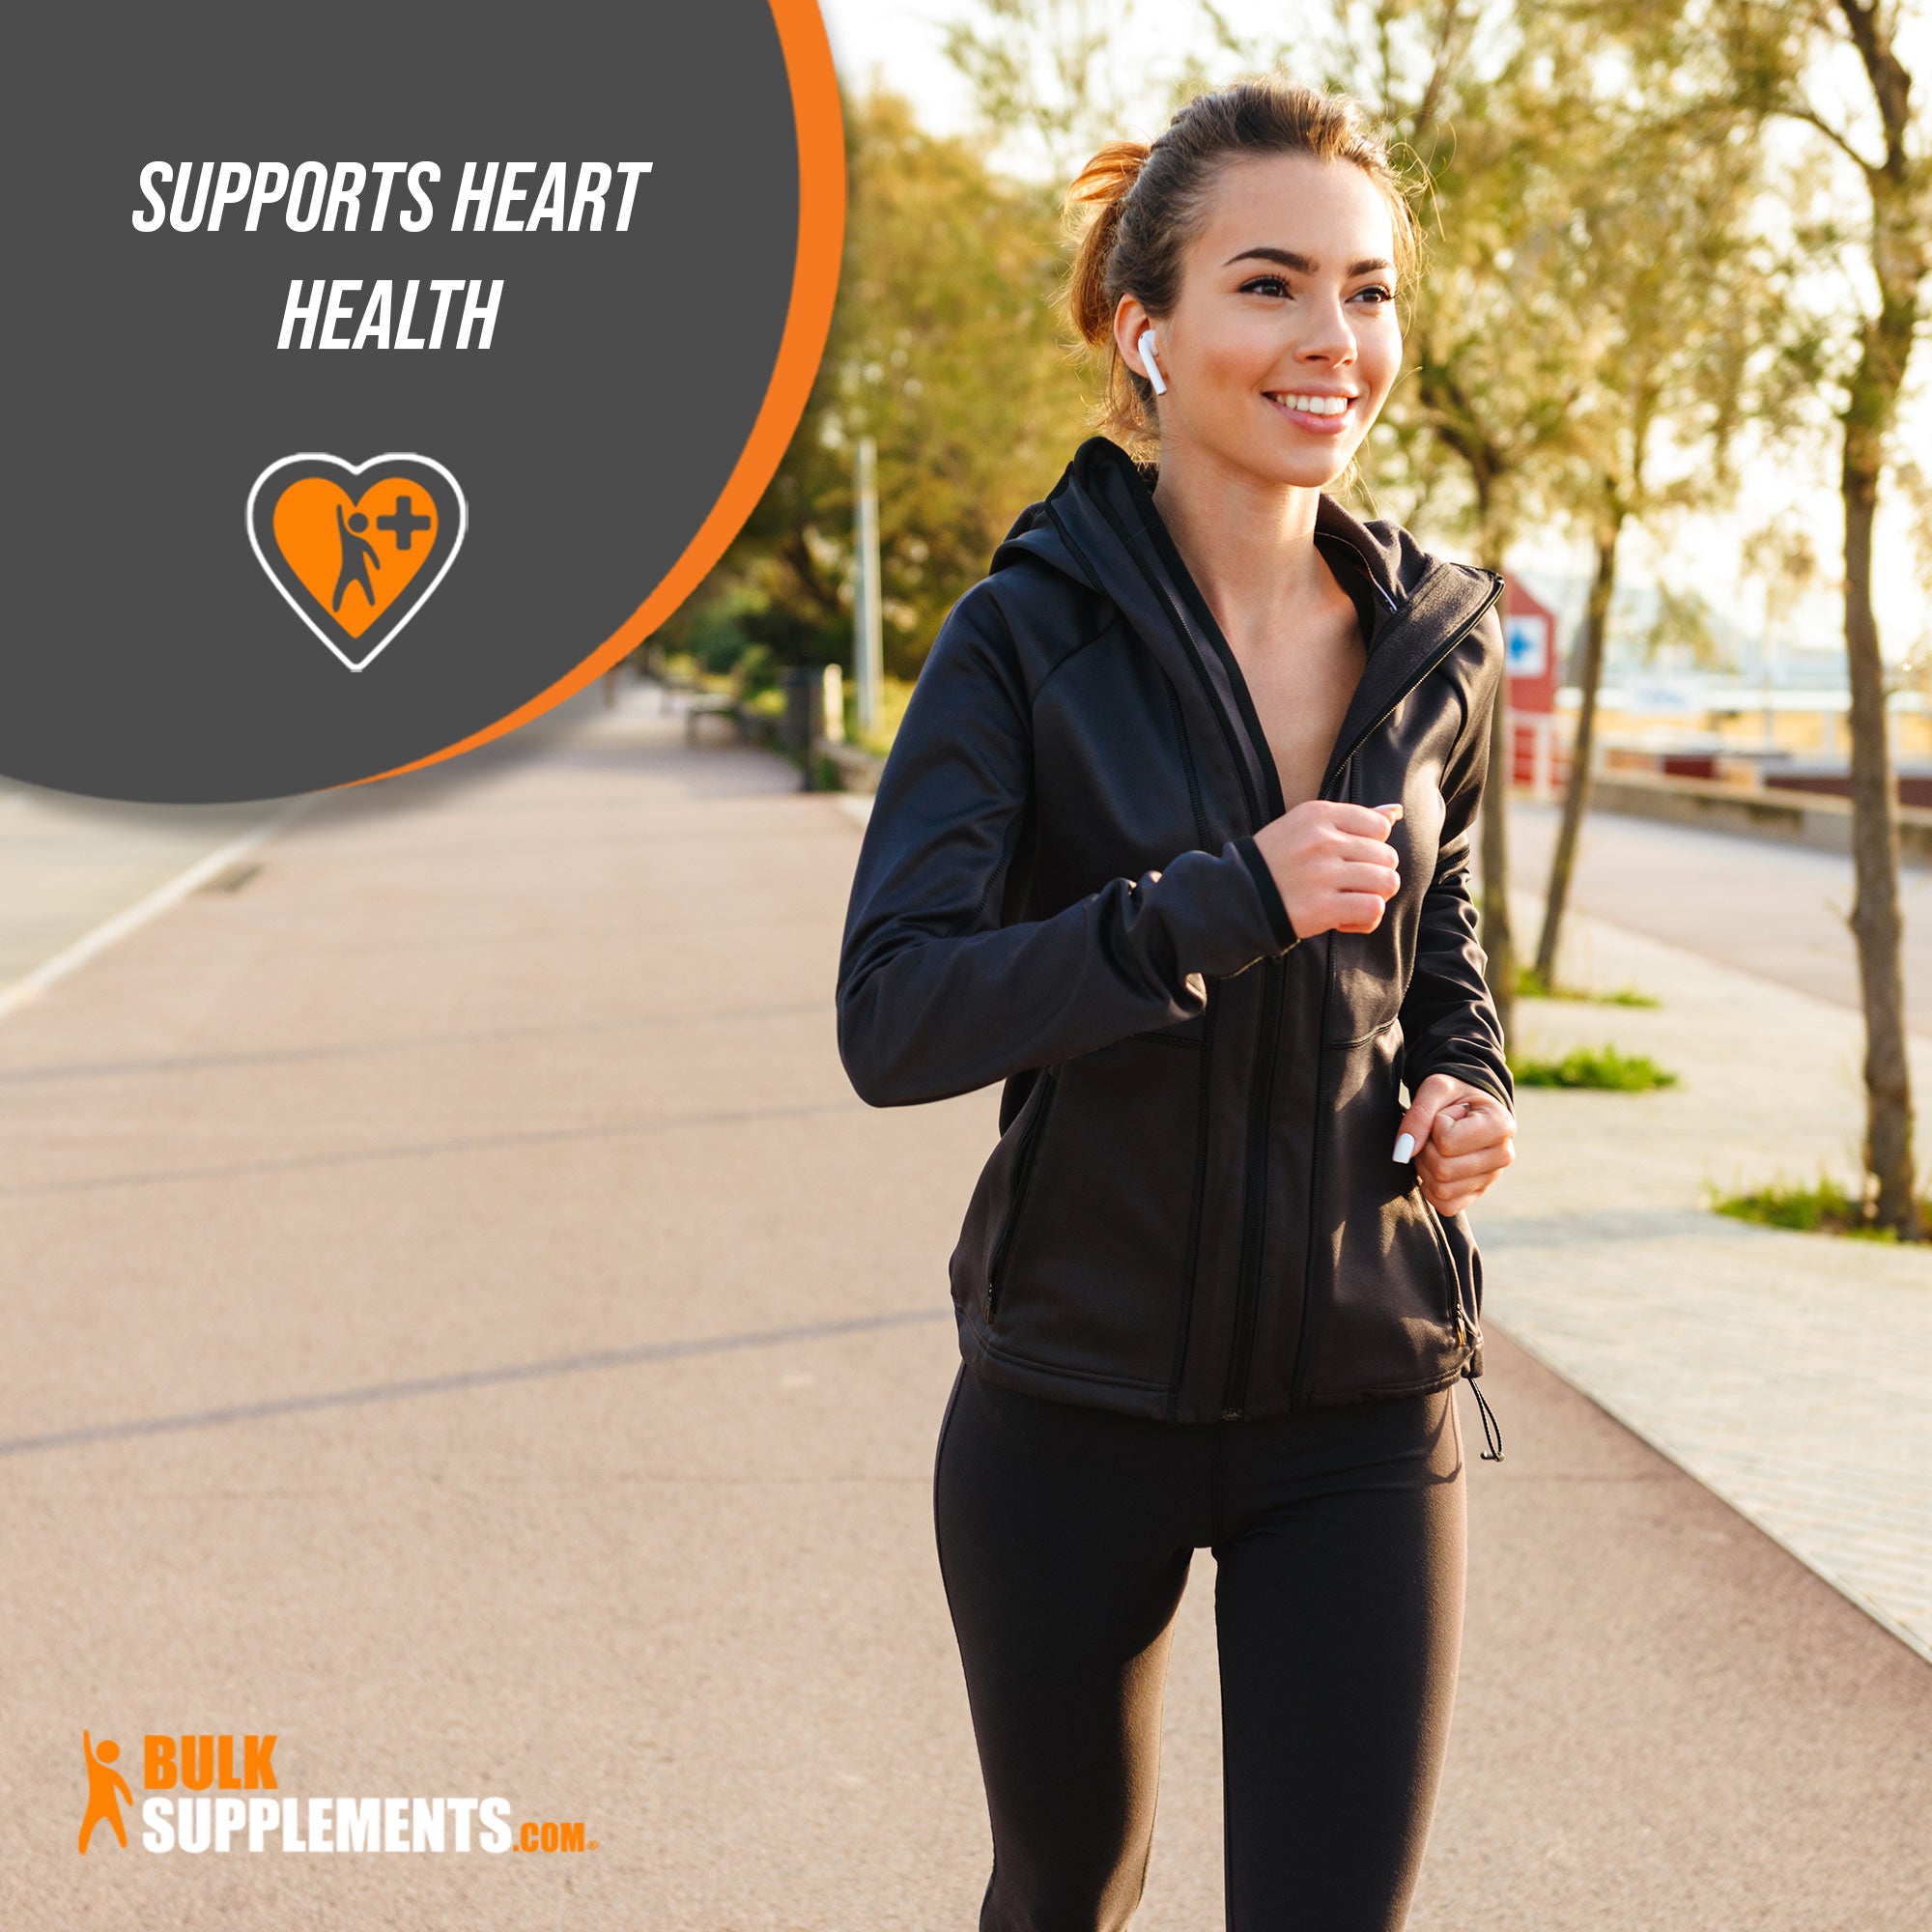 Pyrixodal-5-Phosphate P5P Supports Heart Health